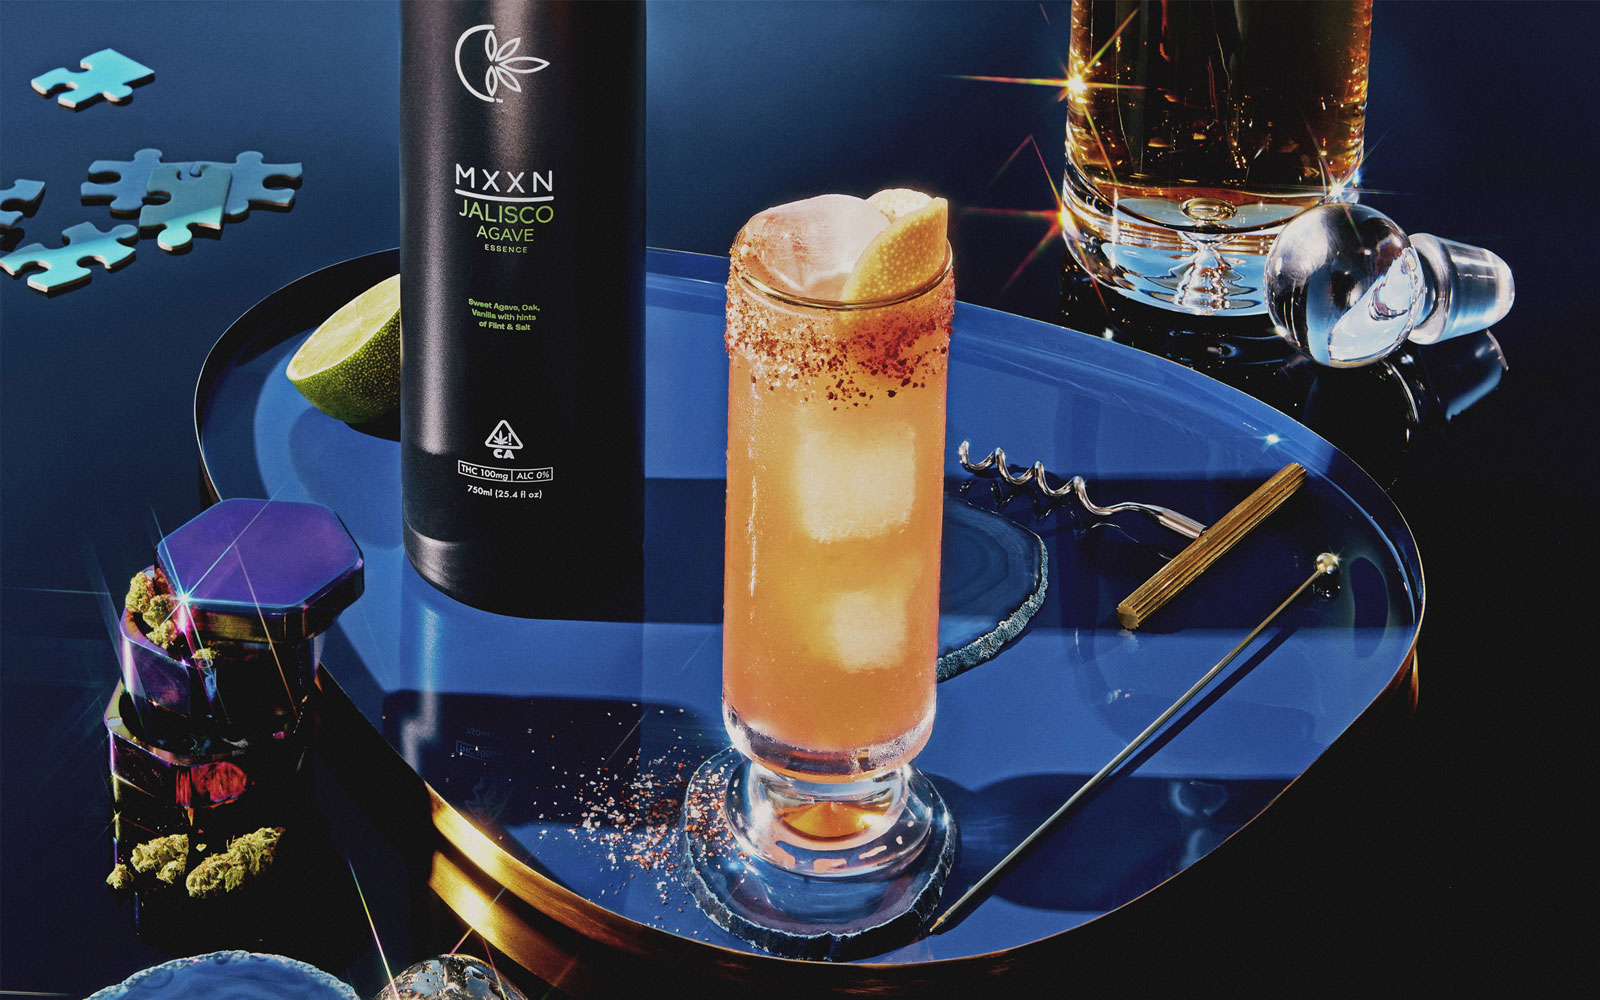 MXXN-Launches-First-Cannabis-Infused-Alcohol-Free-Spirits-Line-Jalisco-Agave